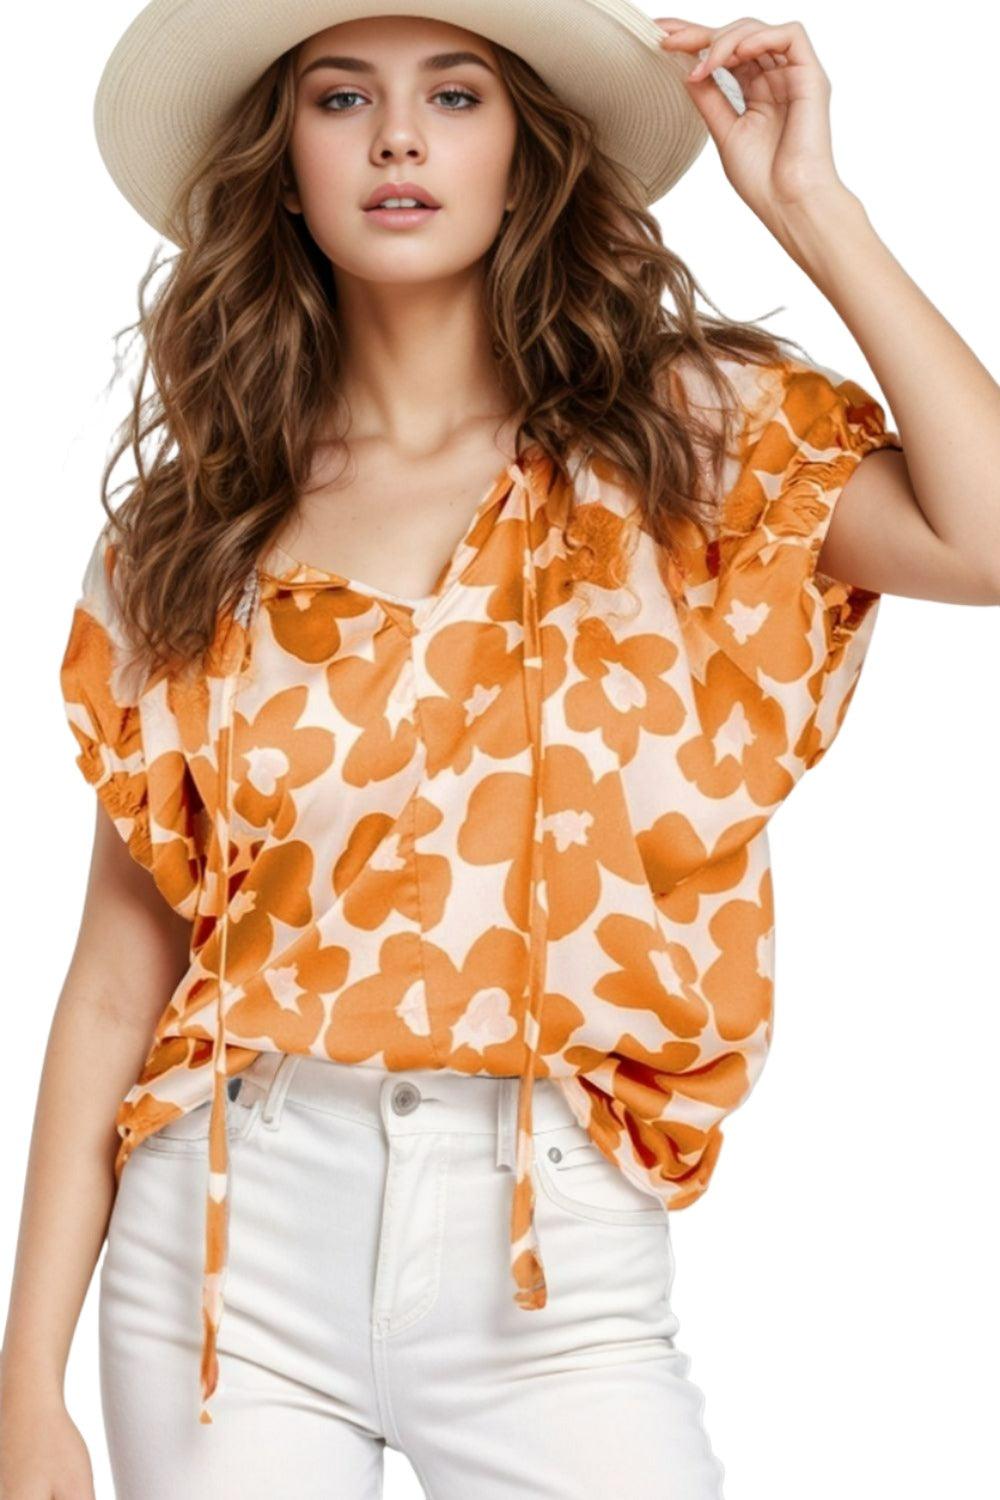 Women's Shirts Printed Tie Neck Short Sleeve Blouse